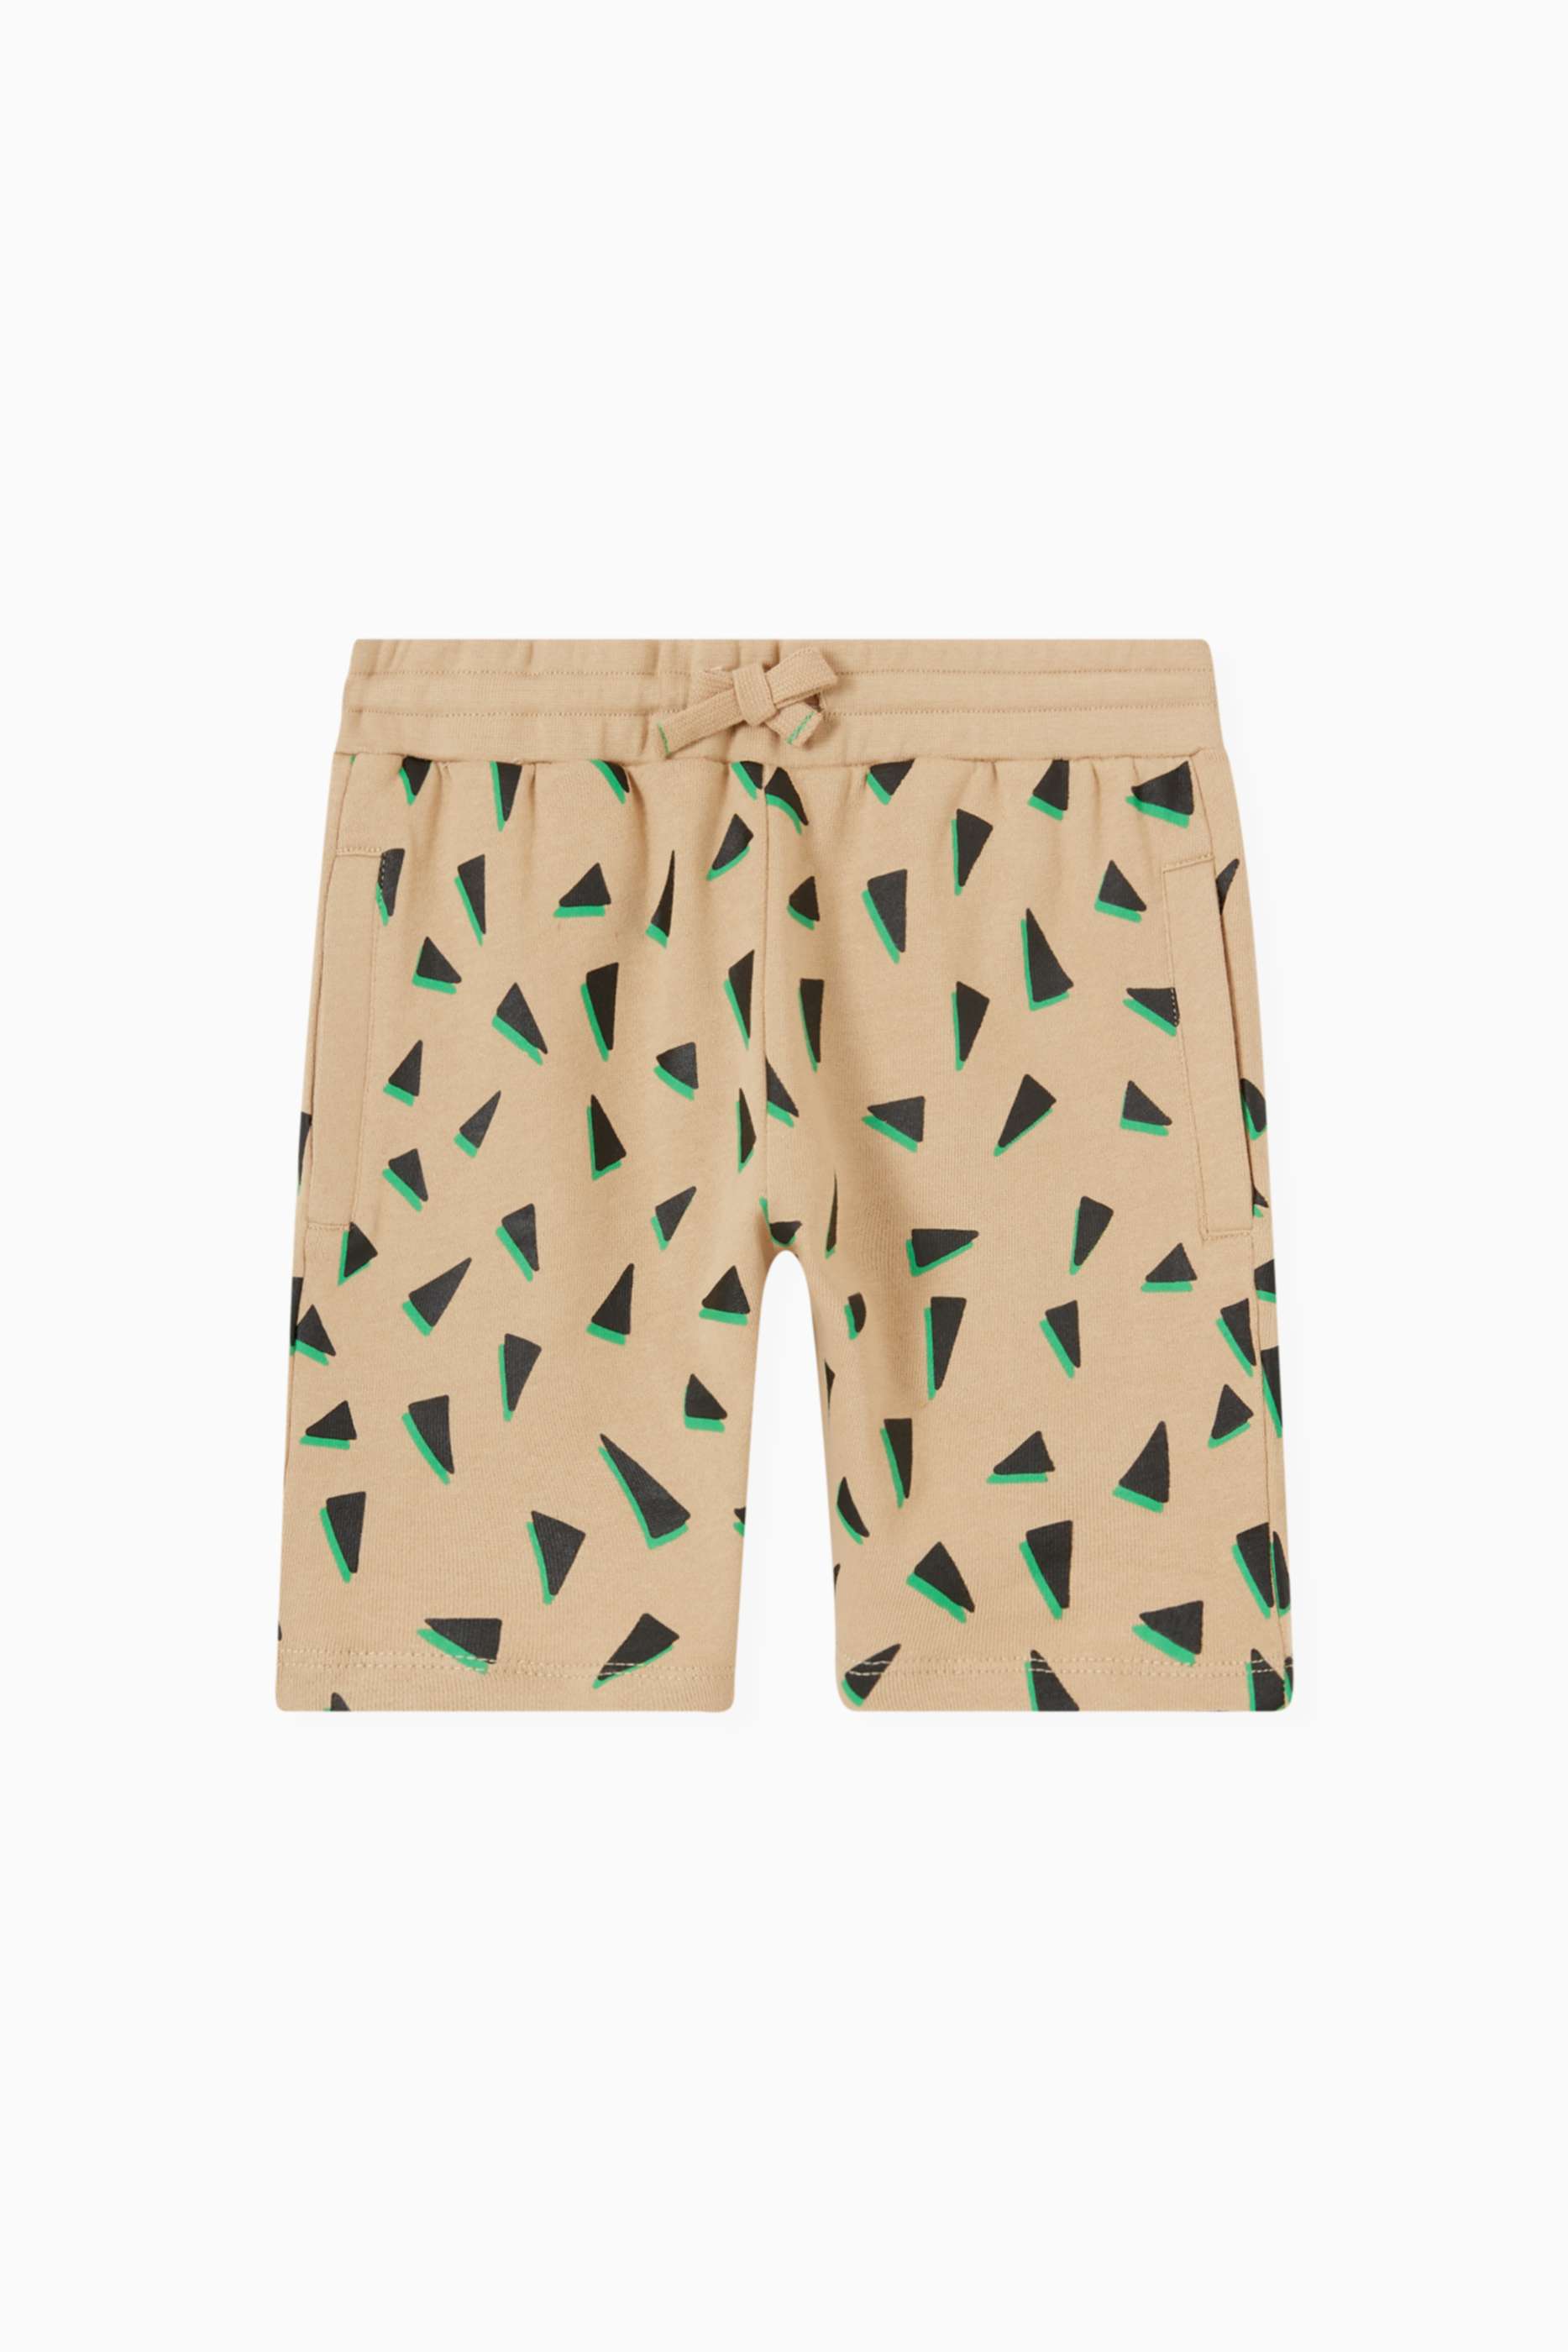 Shop Stella McCartney Neutral All-over Triangle Print Shorts in 